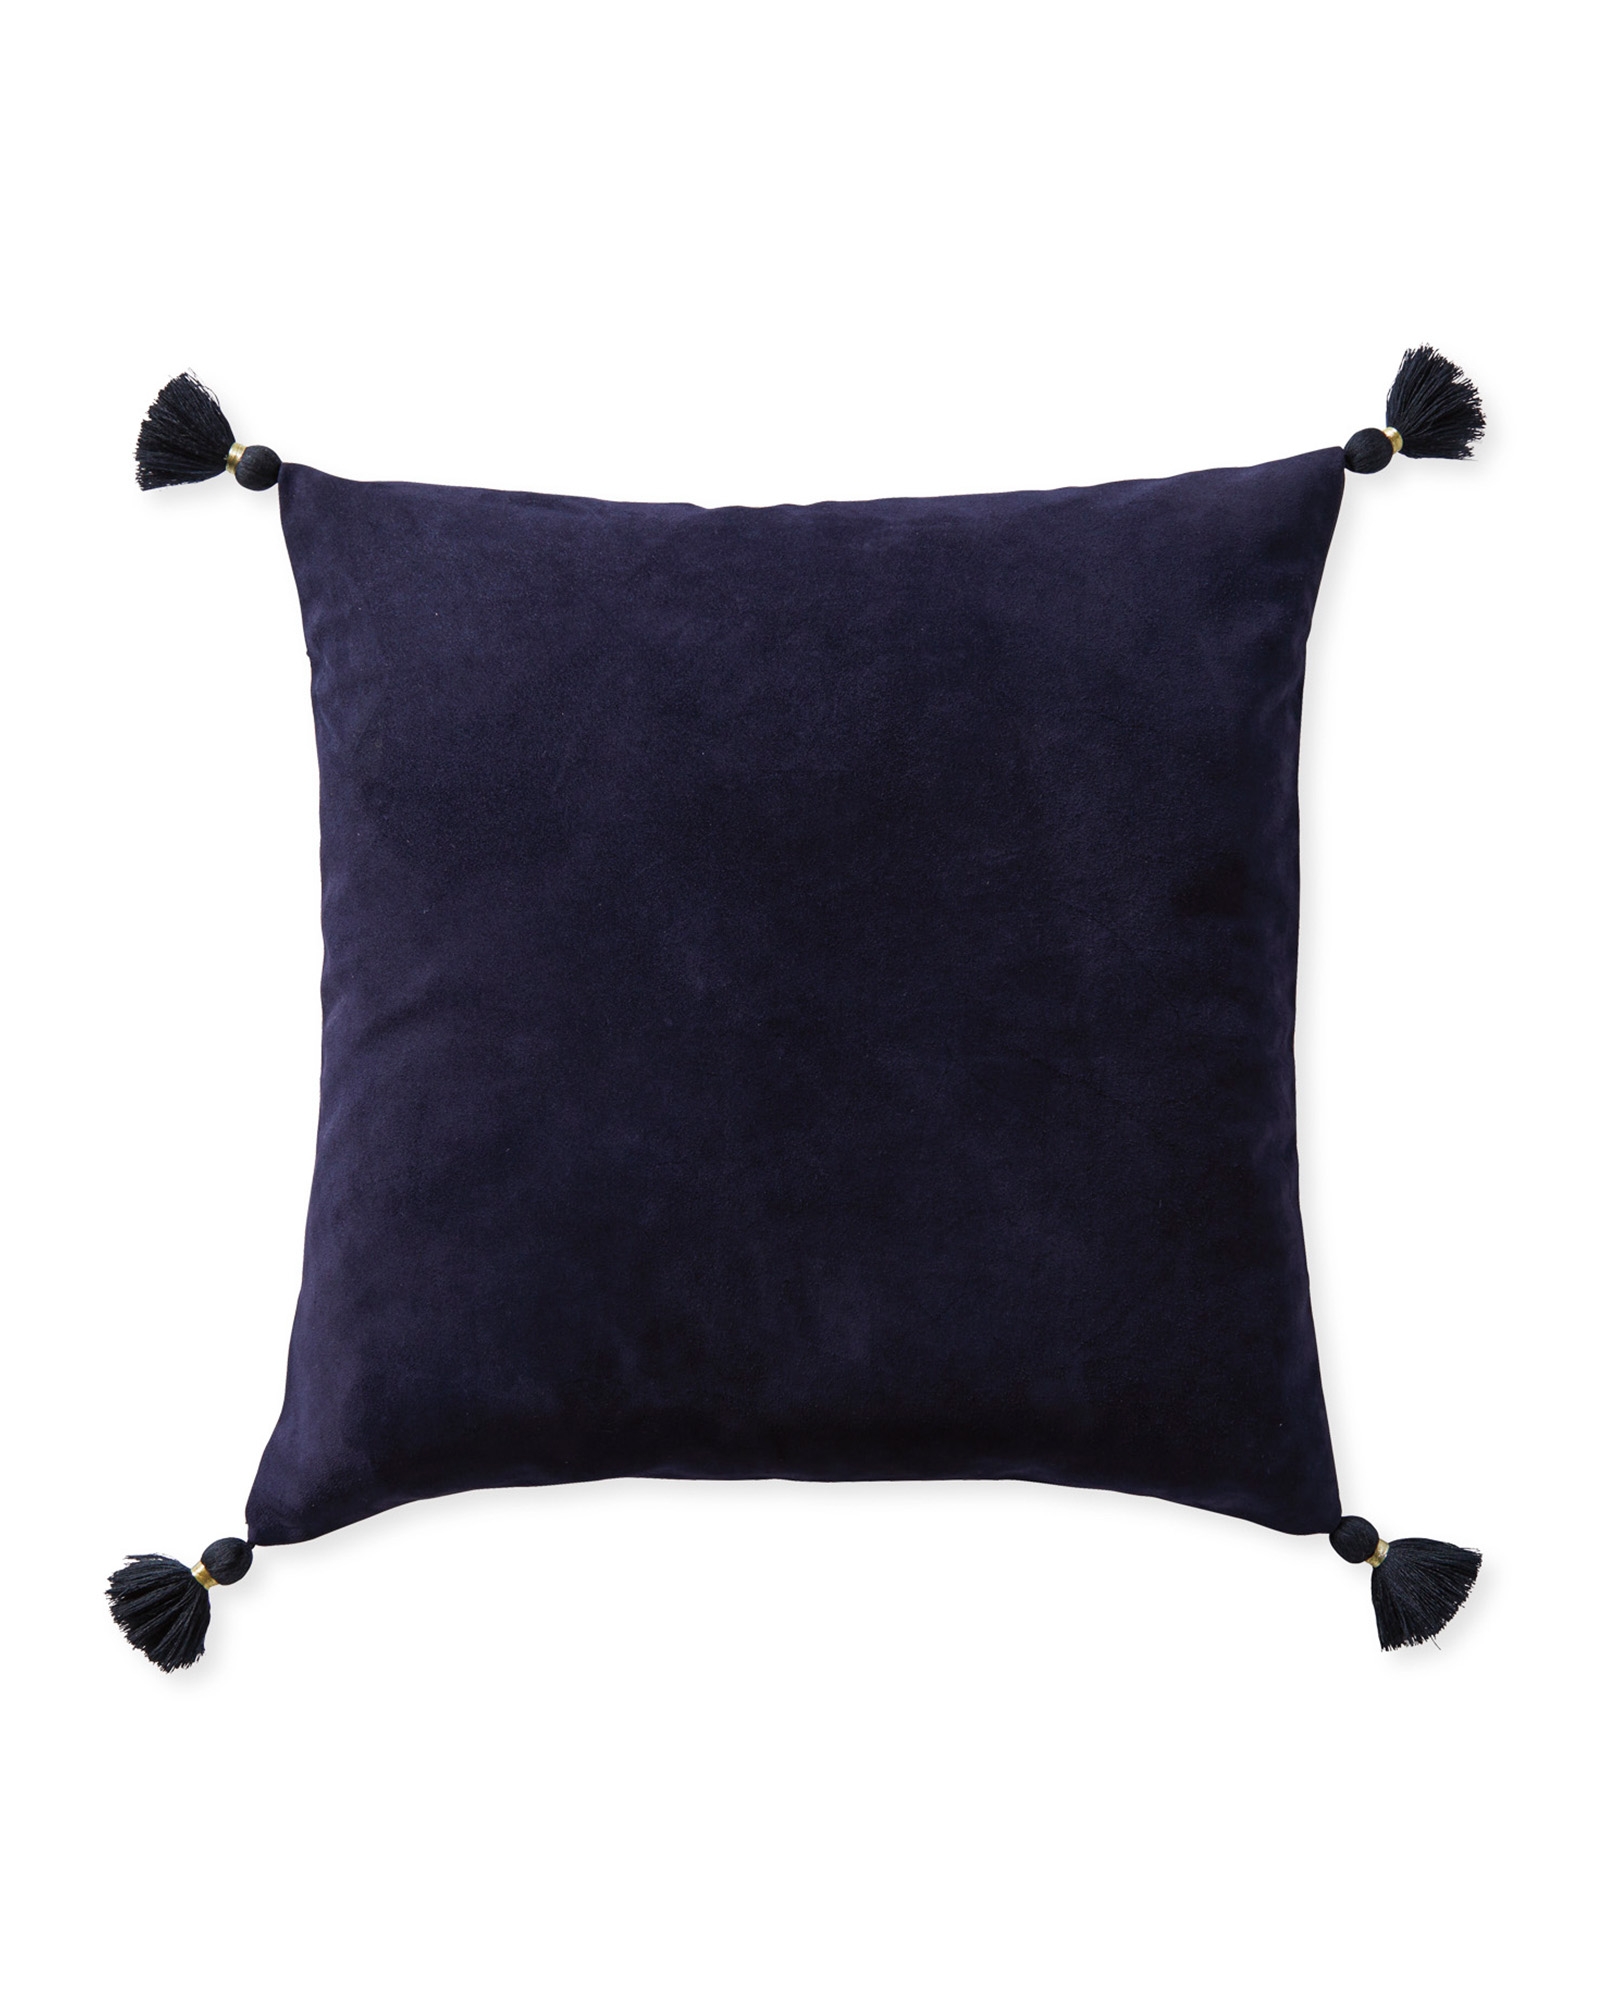 Suede Eva 20" SQ Pillow Cover - Navy - Insert sold separately - Image 0